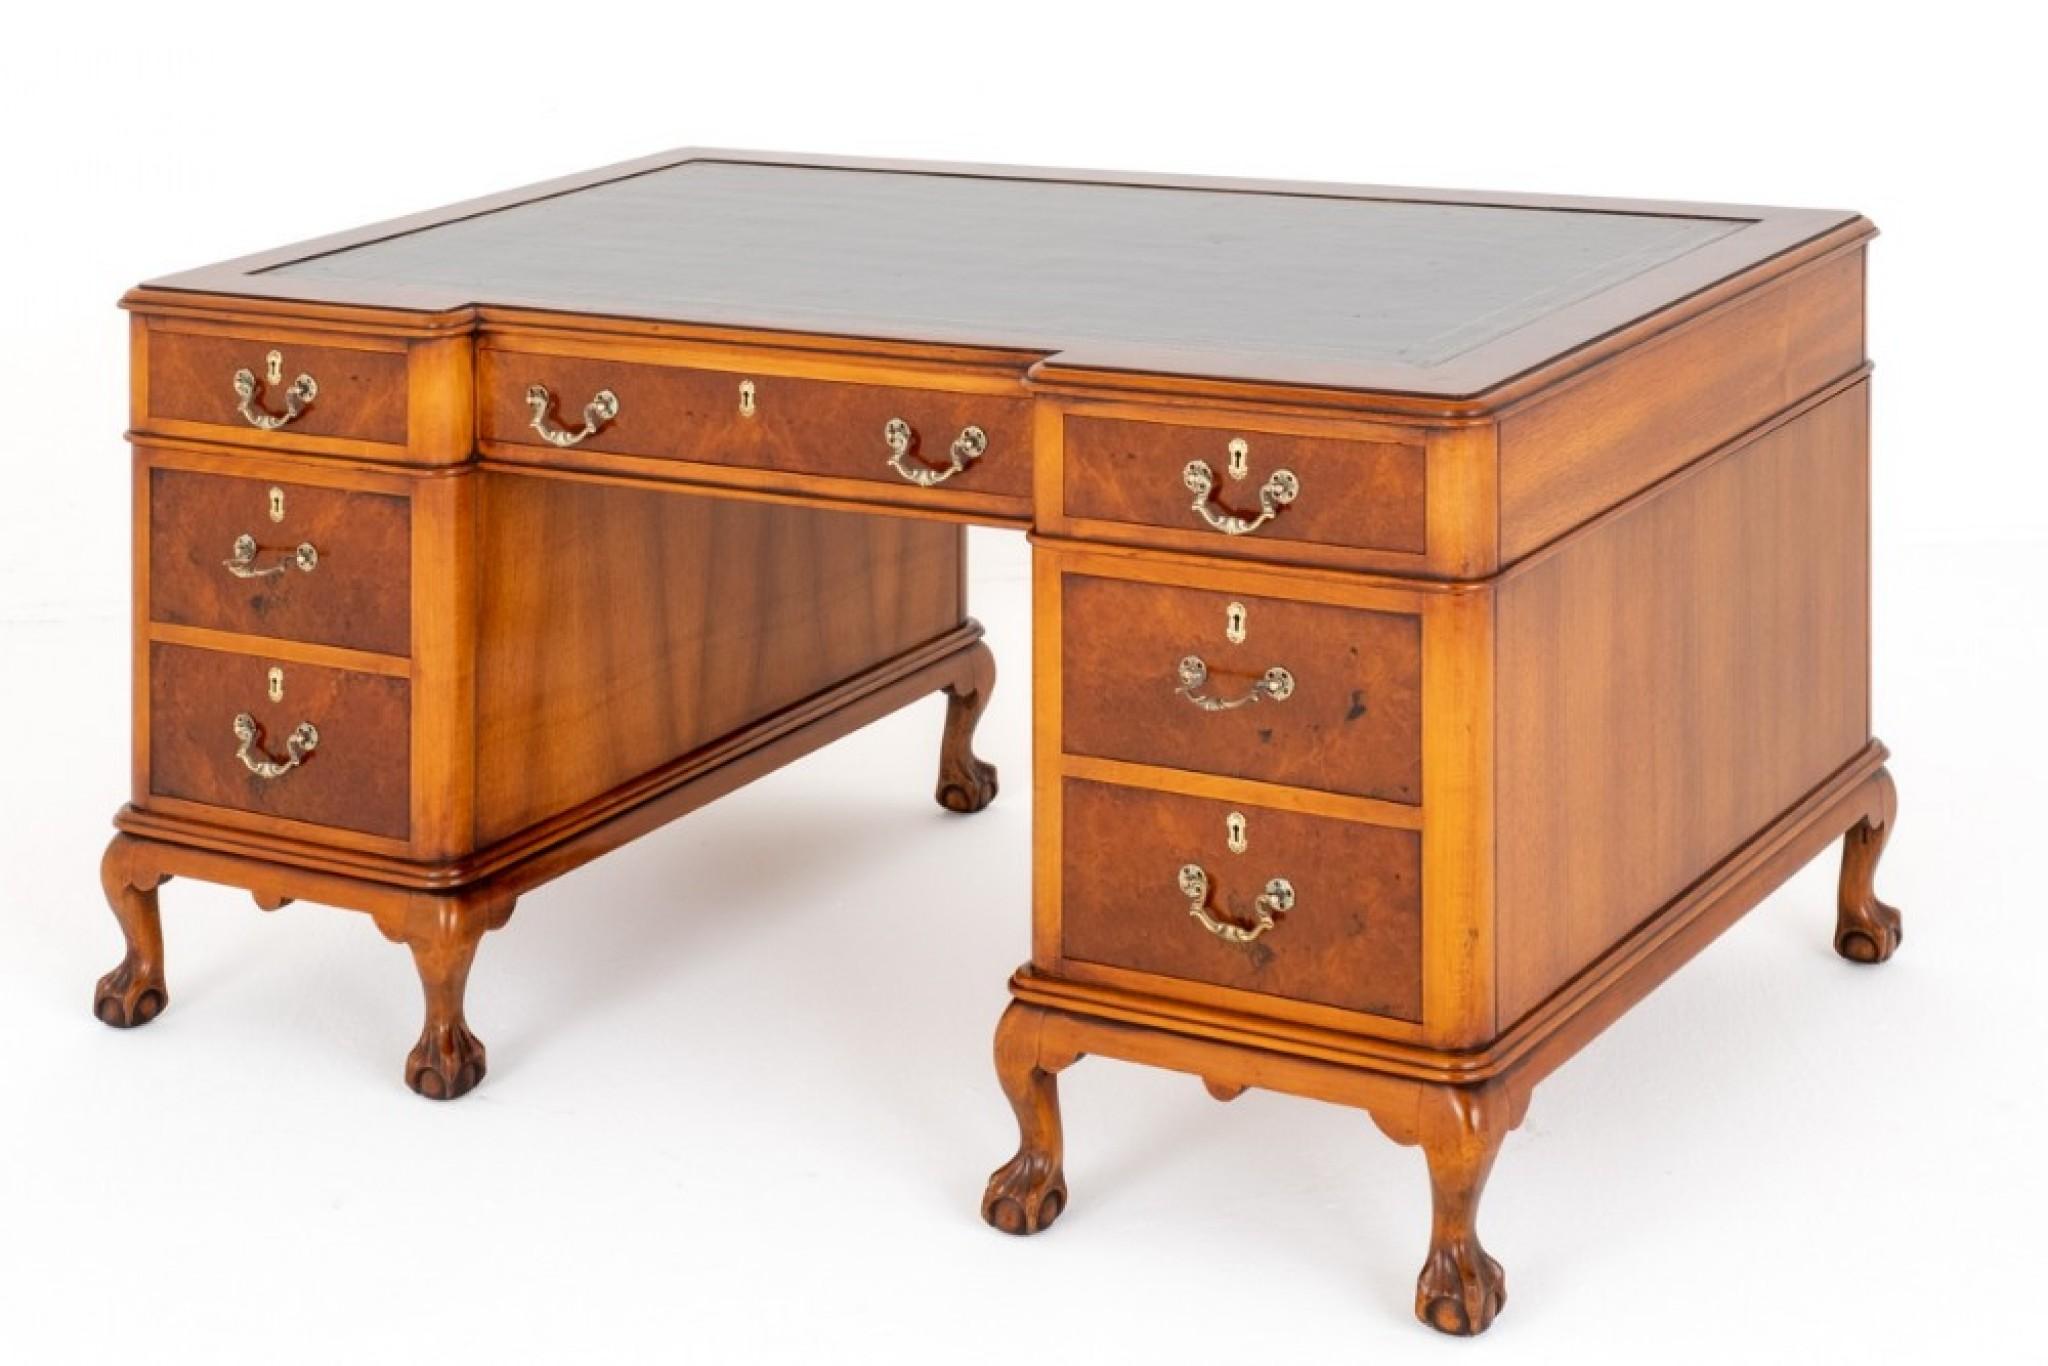 Victorian revival Walnut Pedestal Desk.
This Desk Stands Upon Cabriole Legs with Carved Ball and Claw Feet.
Circa 1920
Having an Arrangement of 7 Mahogany Lined Drawers.
The Drawers Featuring Burr Walnut Timbers and Retain Their
Decorative Brass